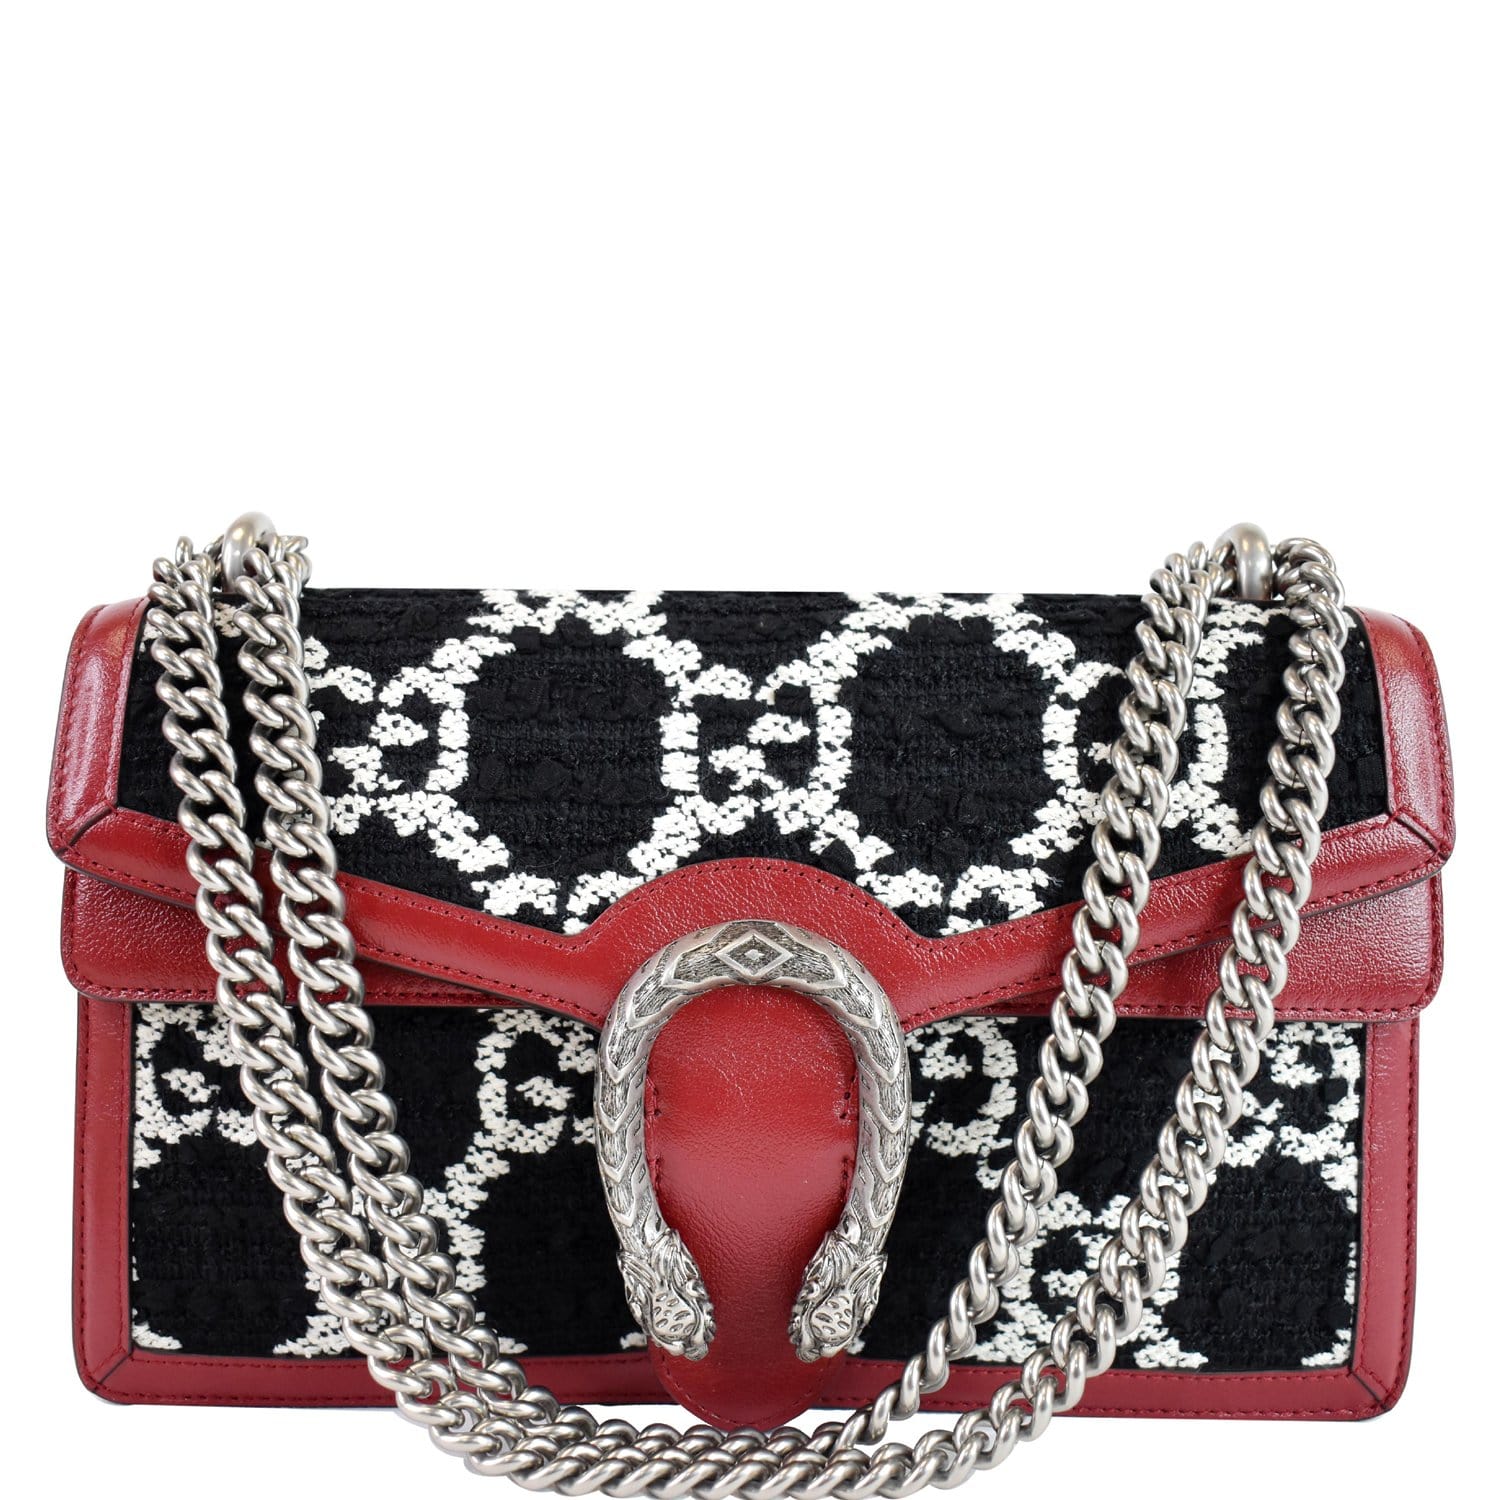 Gucci Dionysus Small Shoulder Bag in Black Leather 400249